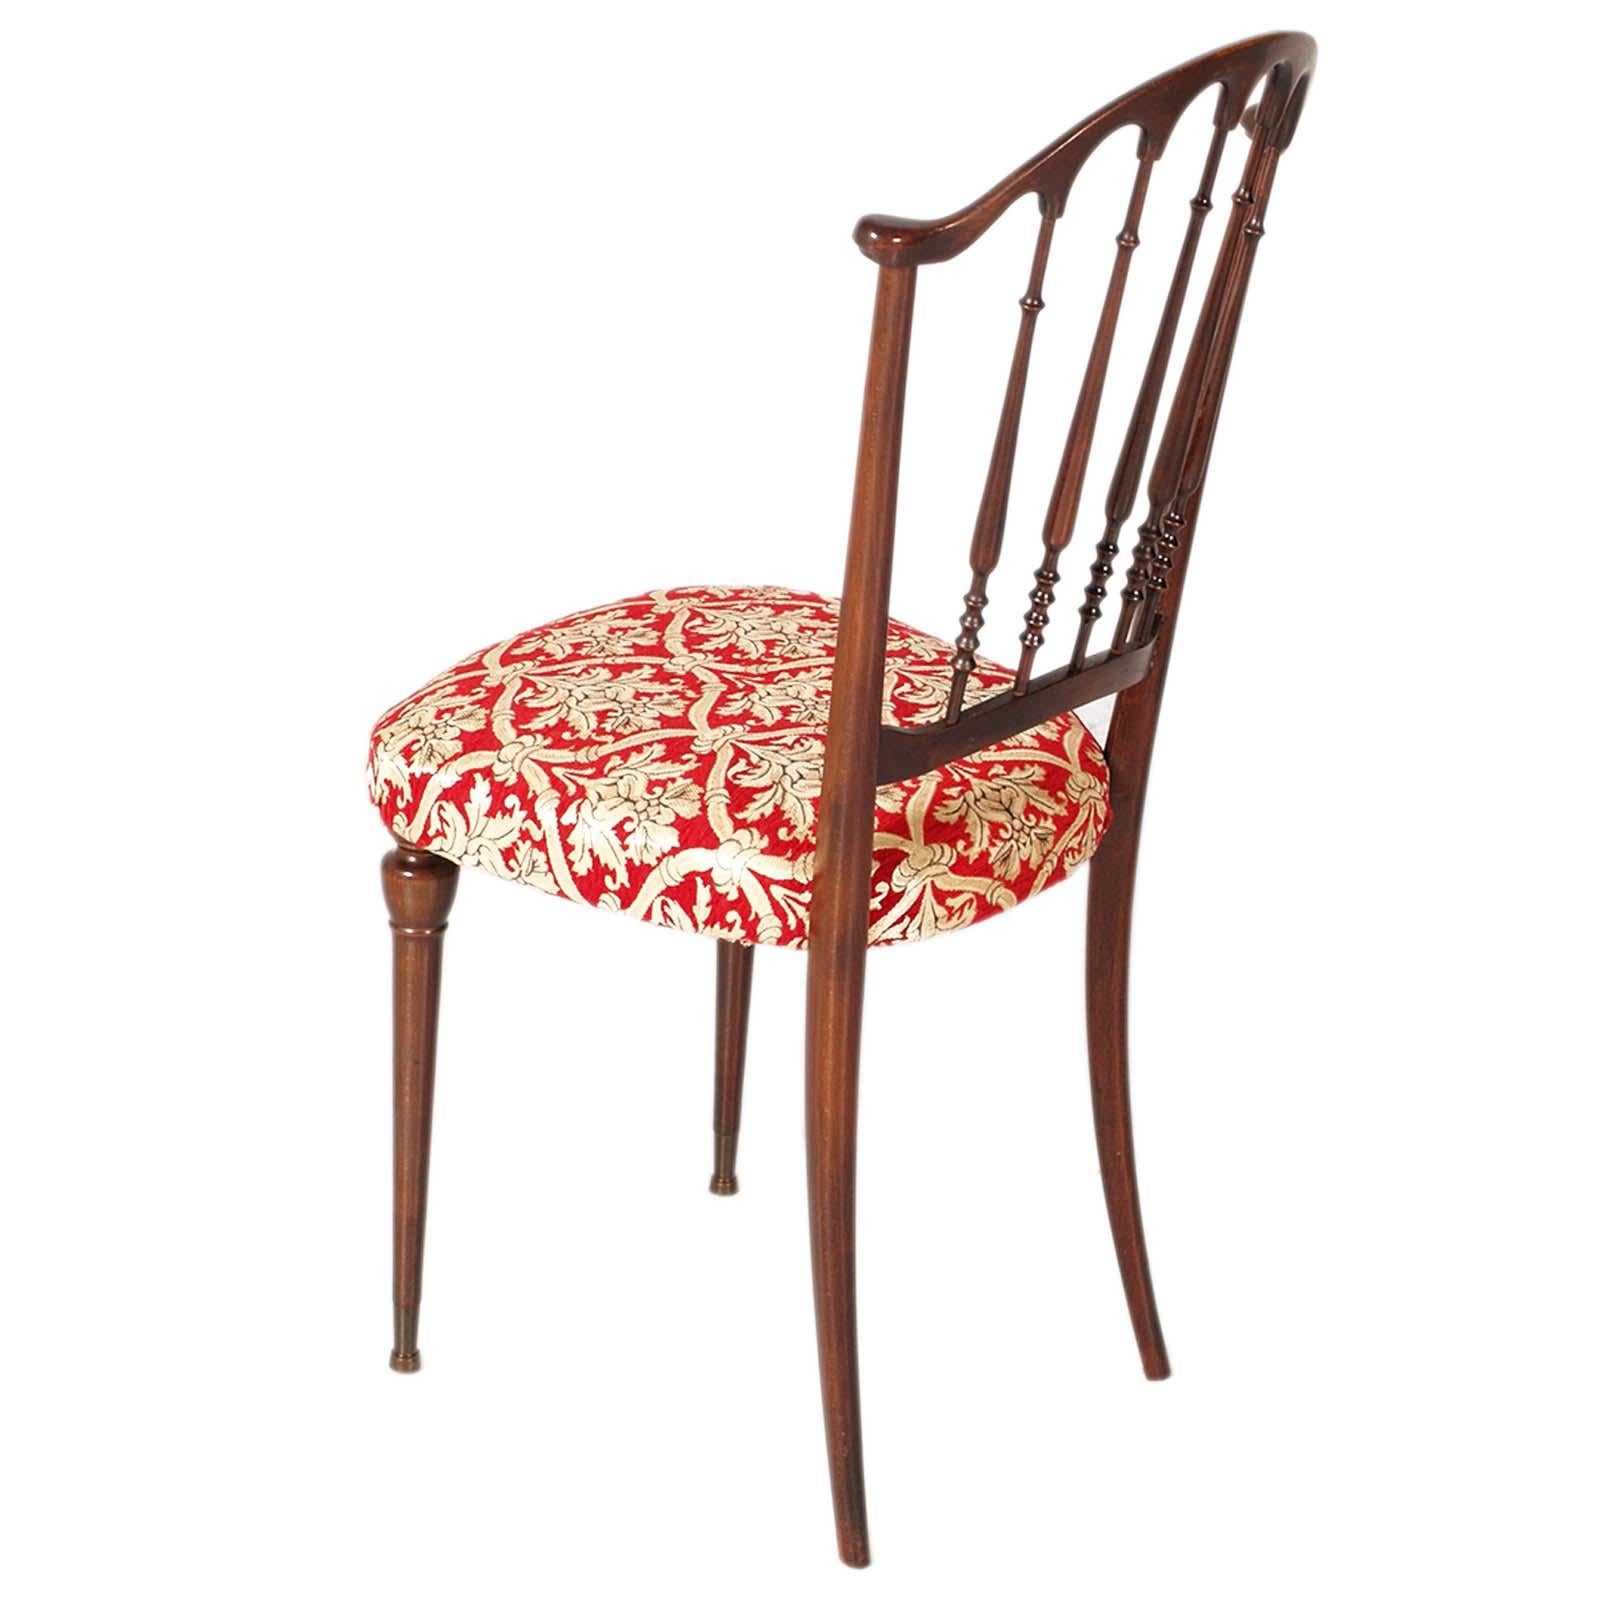 Elegant mid century Chiavari chair, by Paolo Buffa, Belle Epoque, Reupholstered with Fortuny damask fabric, Venice, laquered finish.
To make a corner of your home romantic.